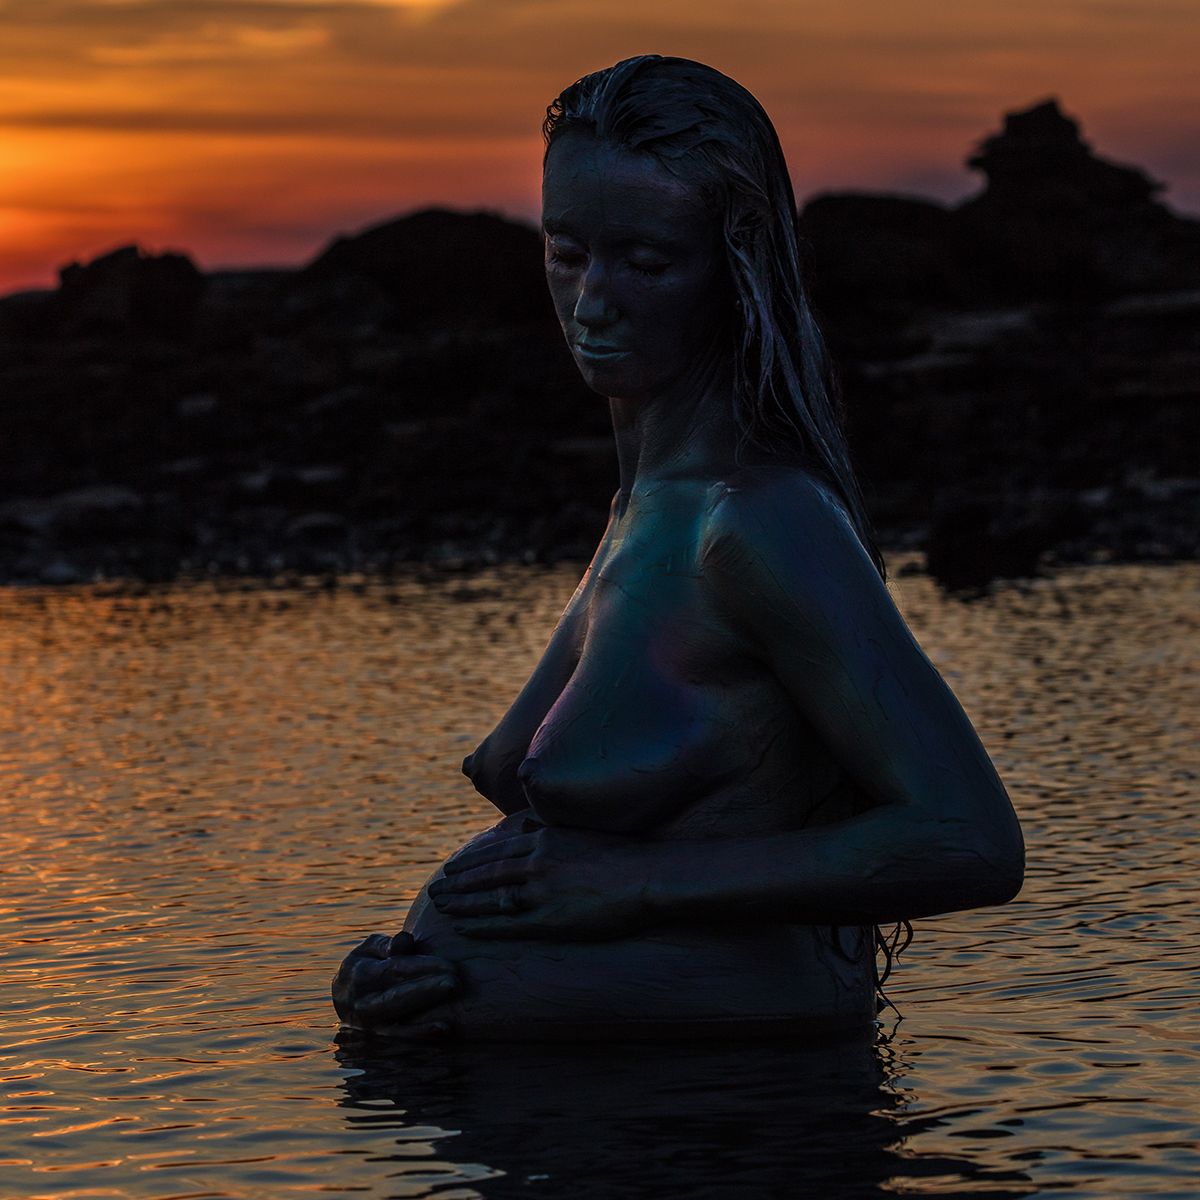 Colour square cropped image of a nude pregnant woman clutching her stomach and standing in water as the sun sets.